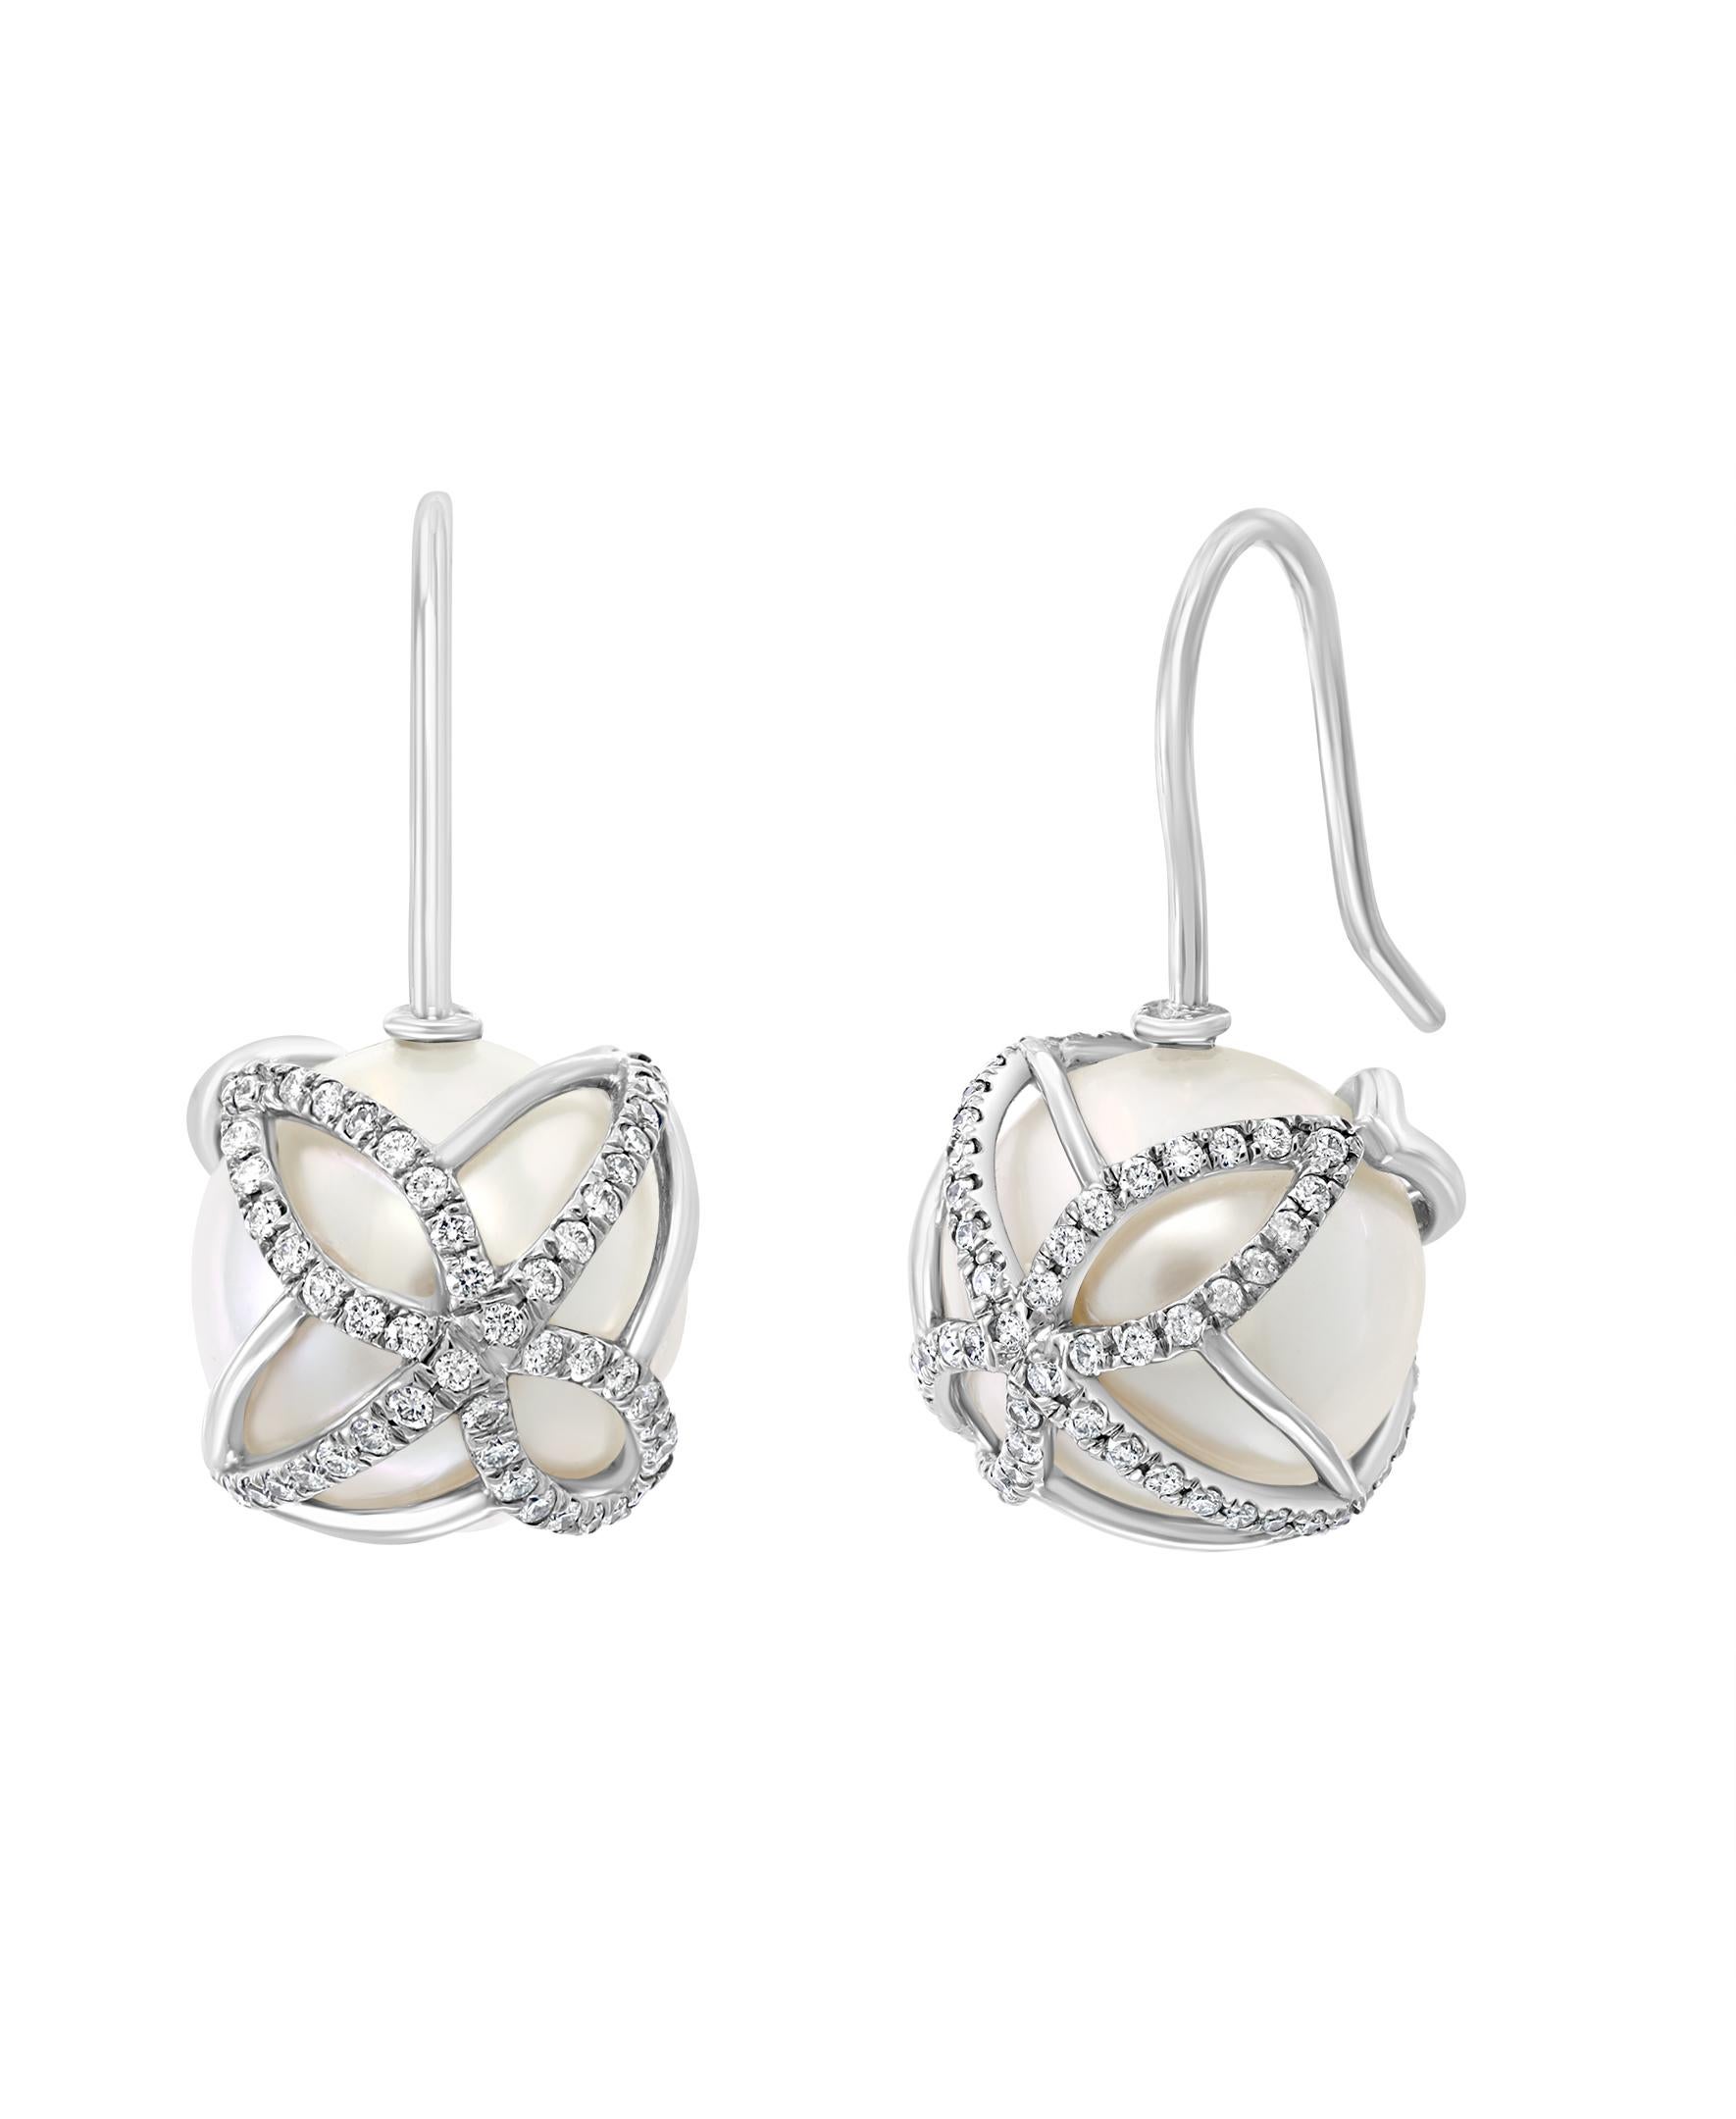 These elegant Diamond and Pearl earrings contain South Sea white round cultured pearls gracefully encased in white gold and diamonds. The butterfly design creates a striking enclosure for these lustrous pearls.
- 14K White Gold
- 0.54 carats of